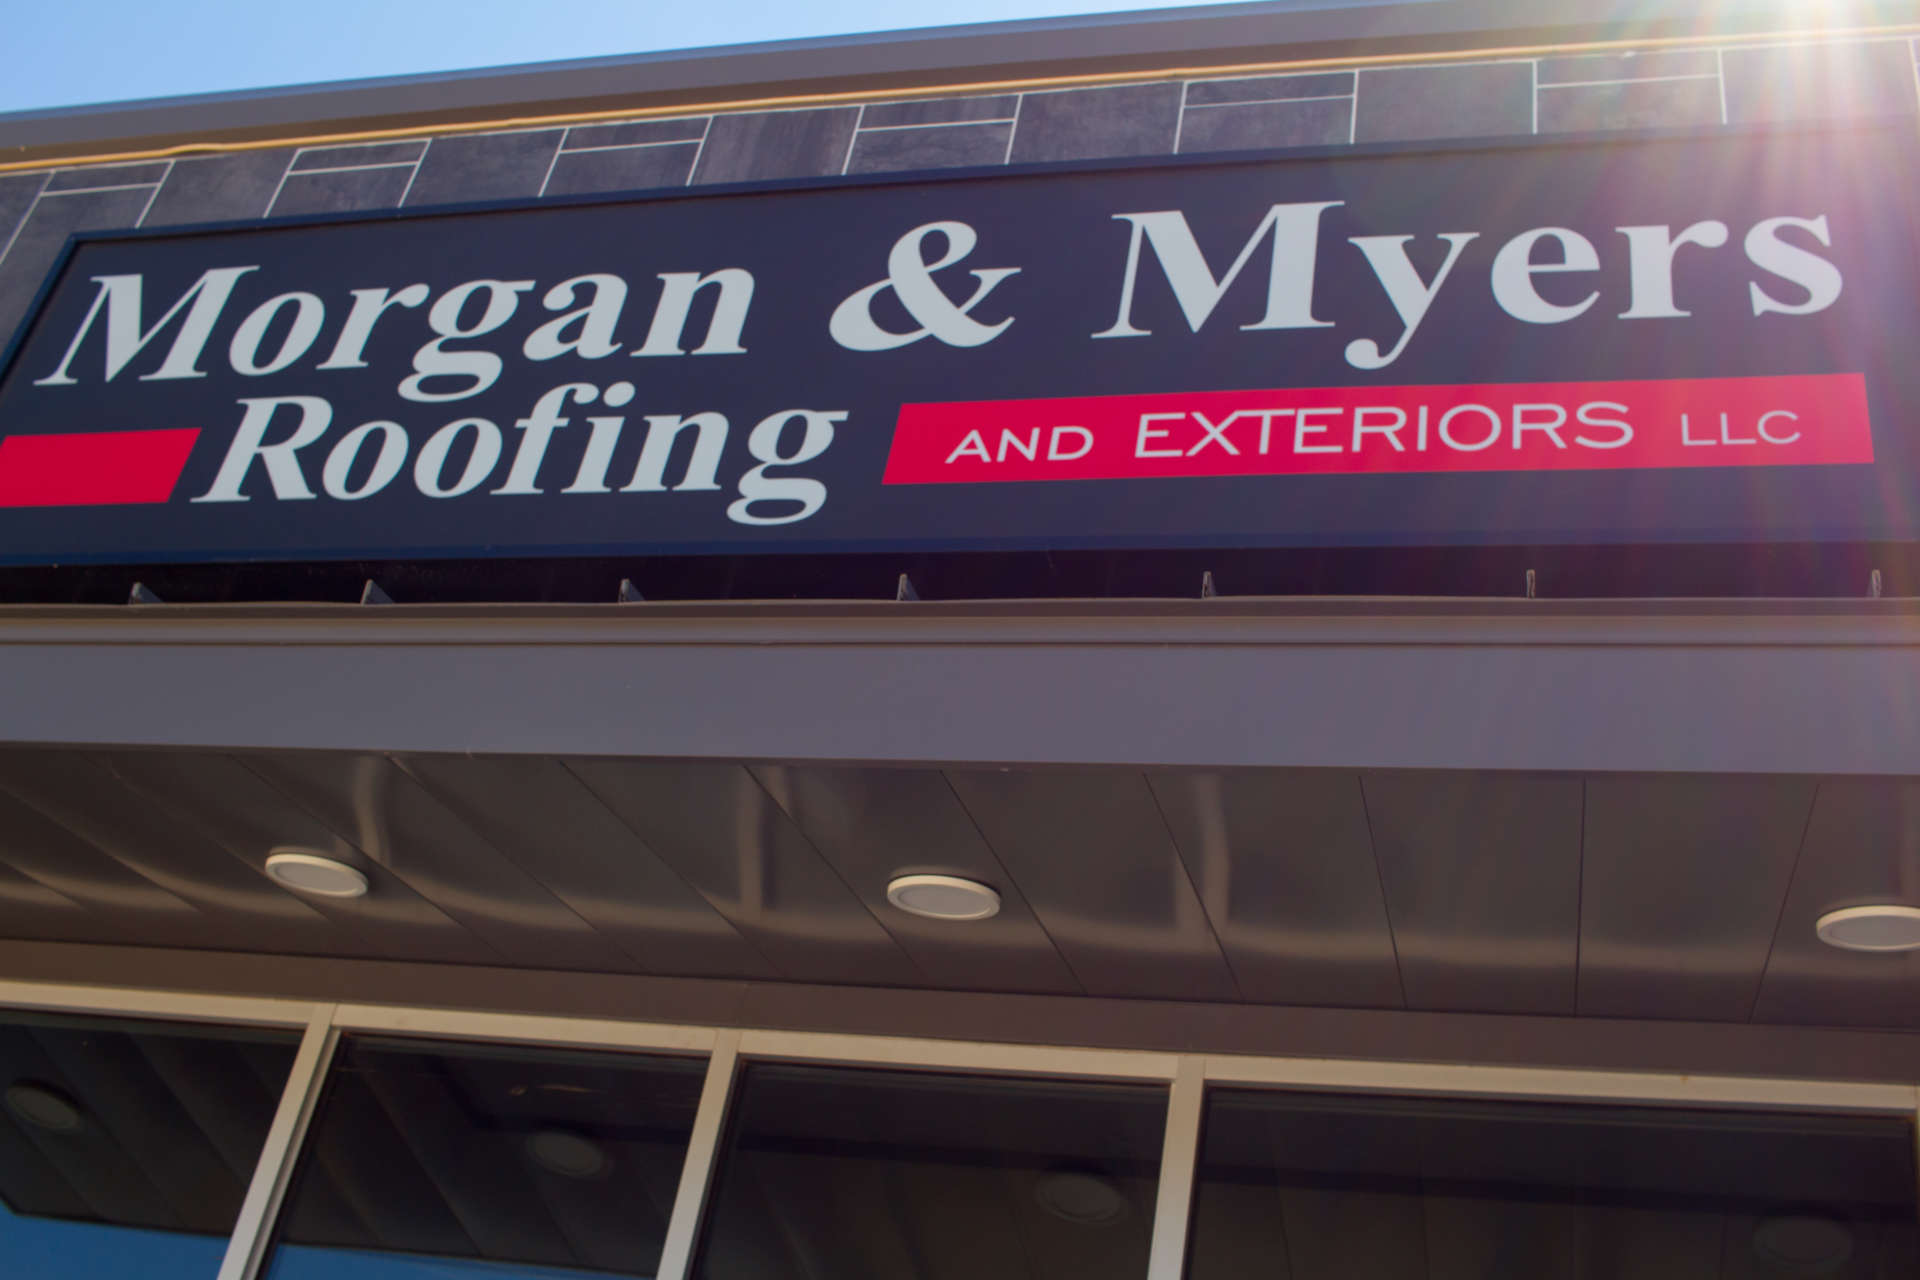 Morgan & Myers Roofing and Exteriors Signage above entrance with sunray